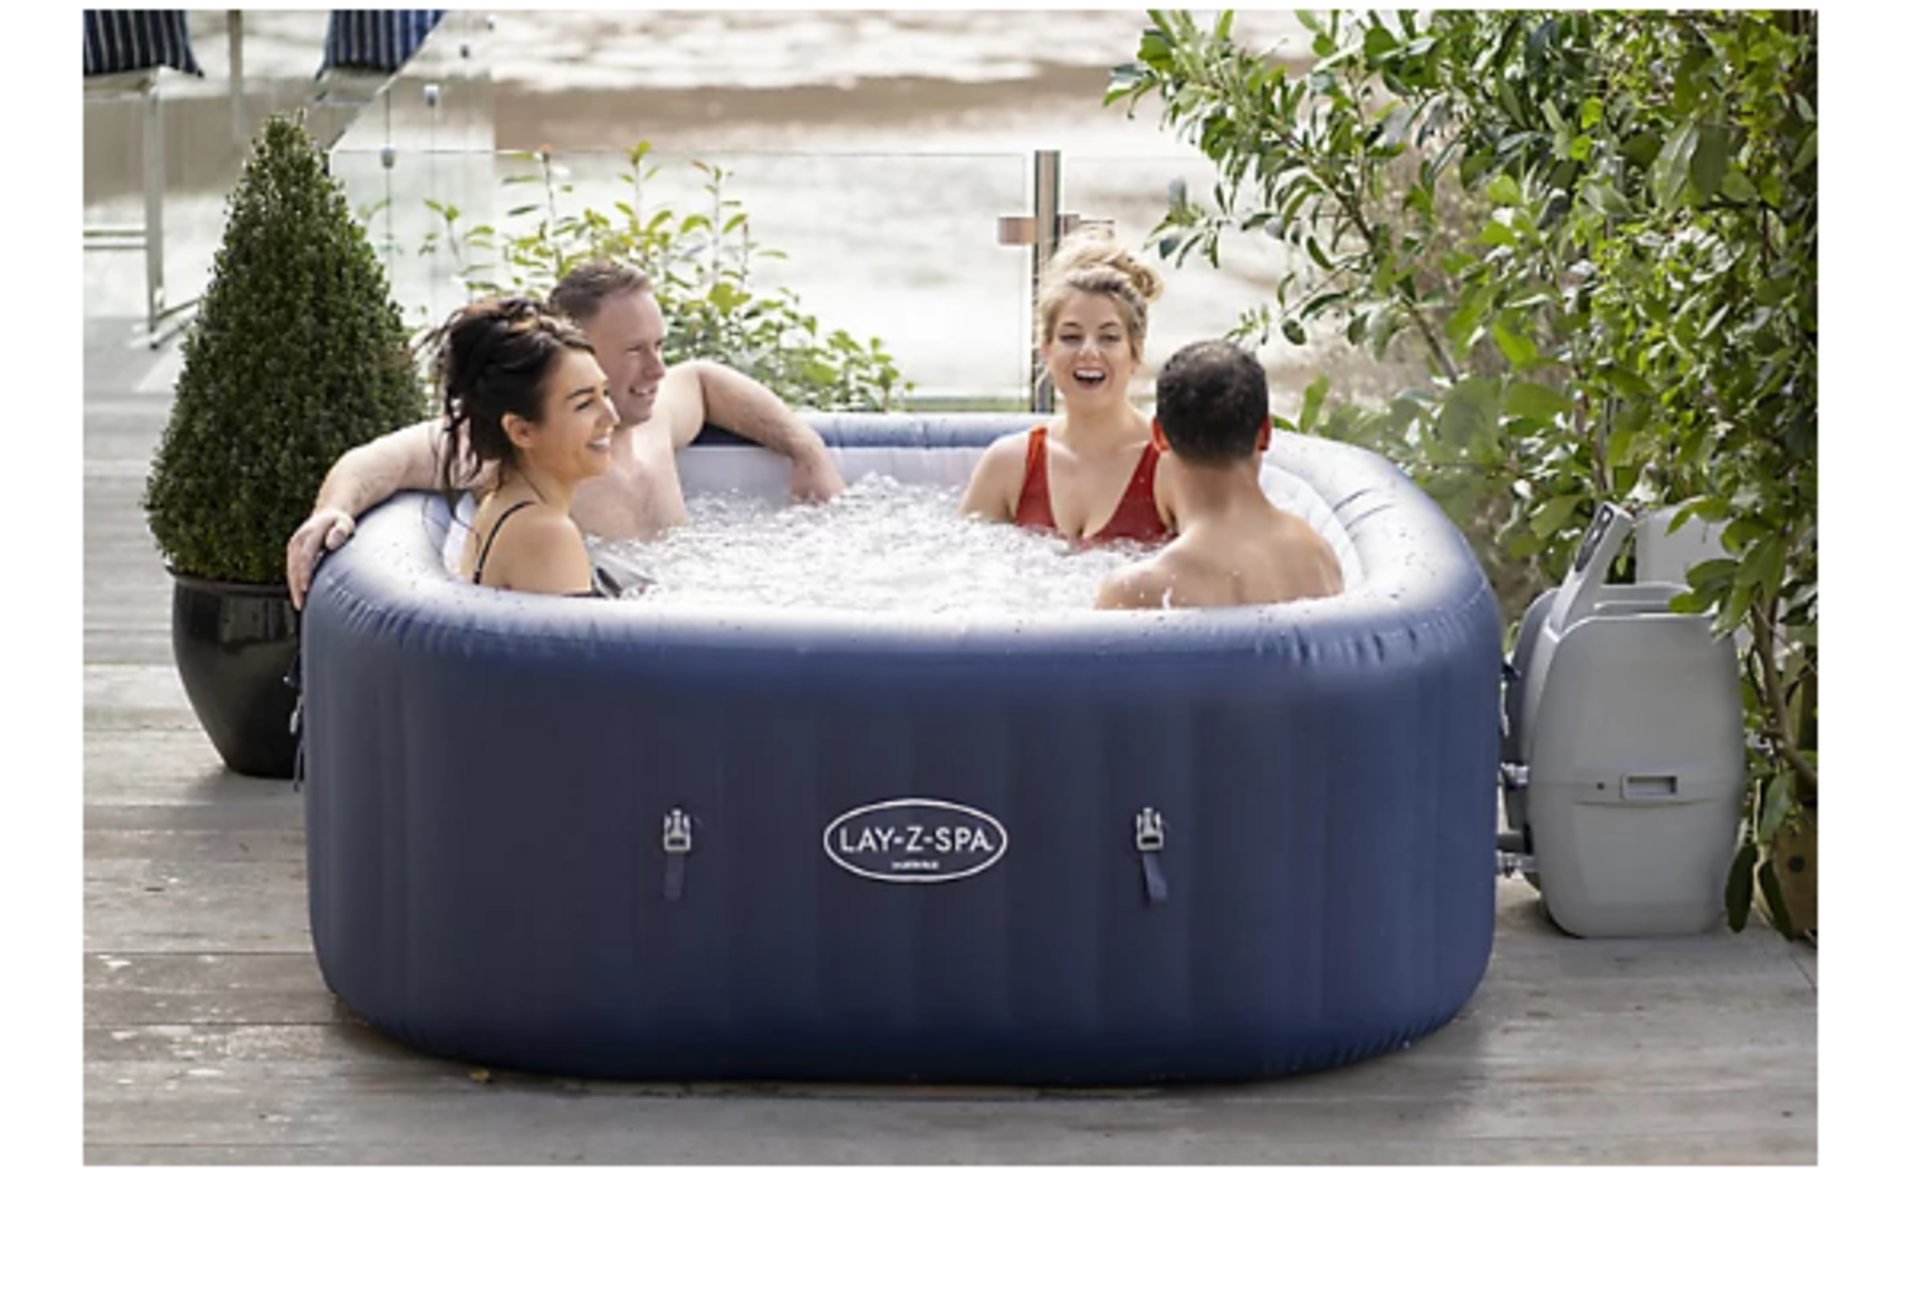 Lay-Z-Spa Hawaii Airjet 6 person Inflatable Hot Tub. - ER.RRP £450.00. The Lay-Z-Spa Hawaii AirJet™ - Image 2 of 2